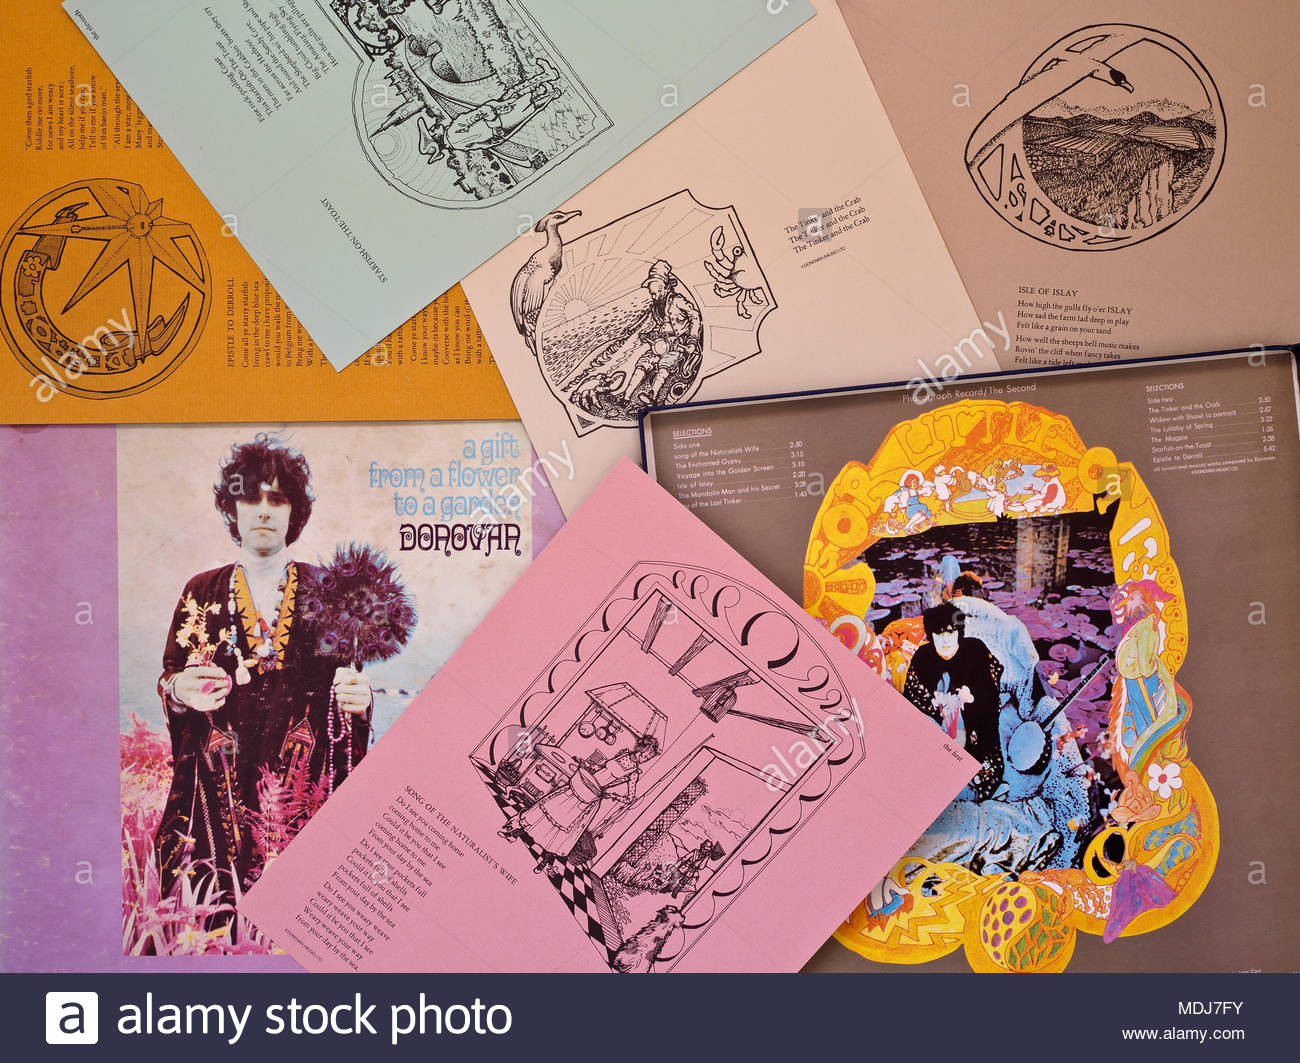 A Gift From A Flower To A Garden Donovan Vinyl Lp With Lyrics Sheets Top Down Stock Photo Alamy